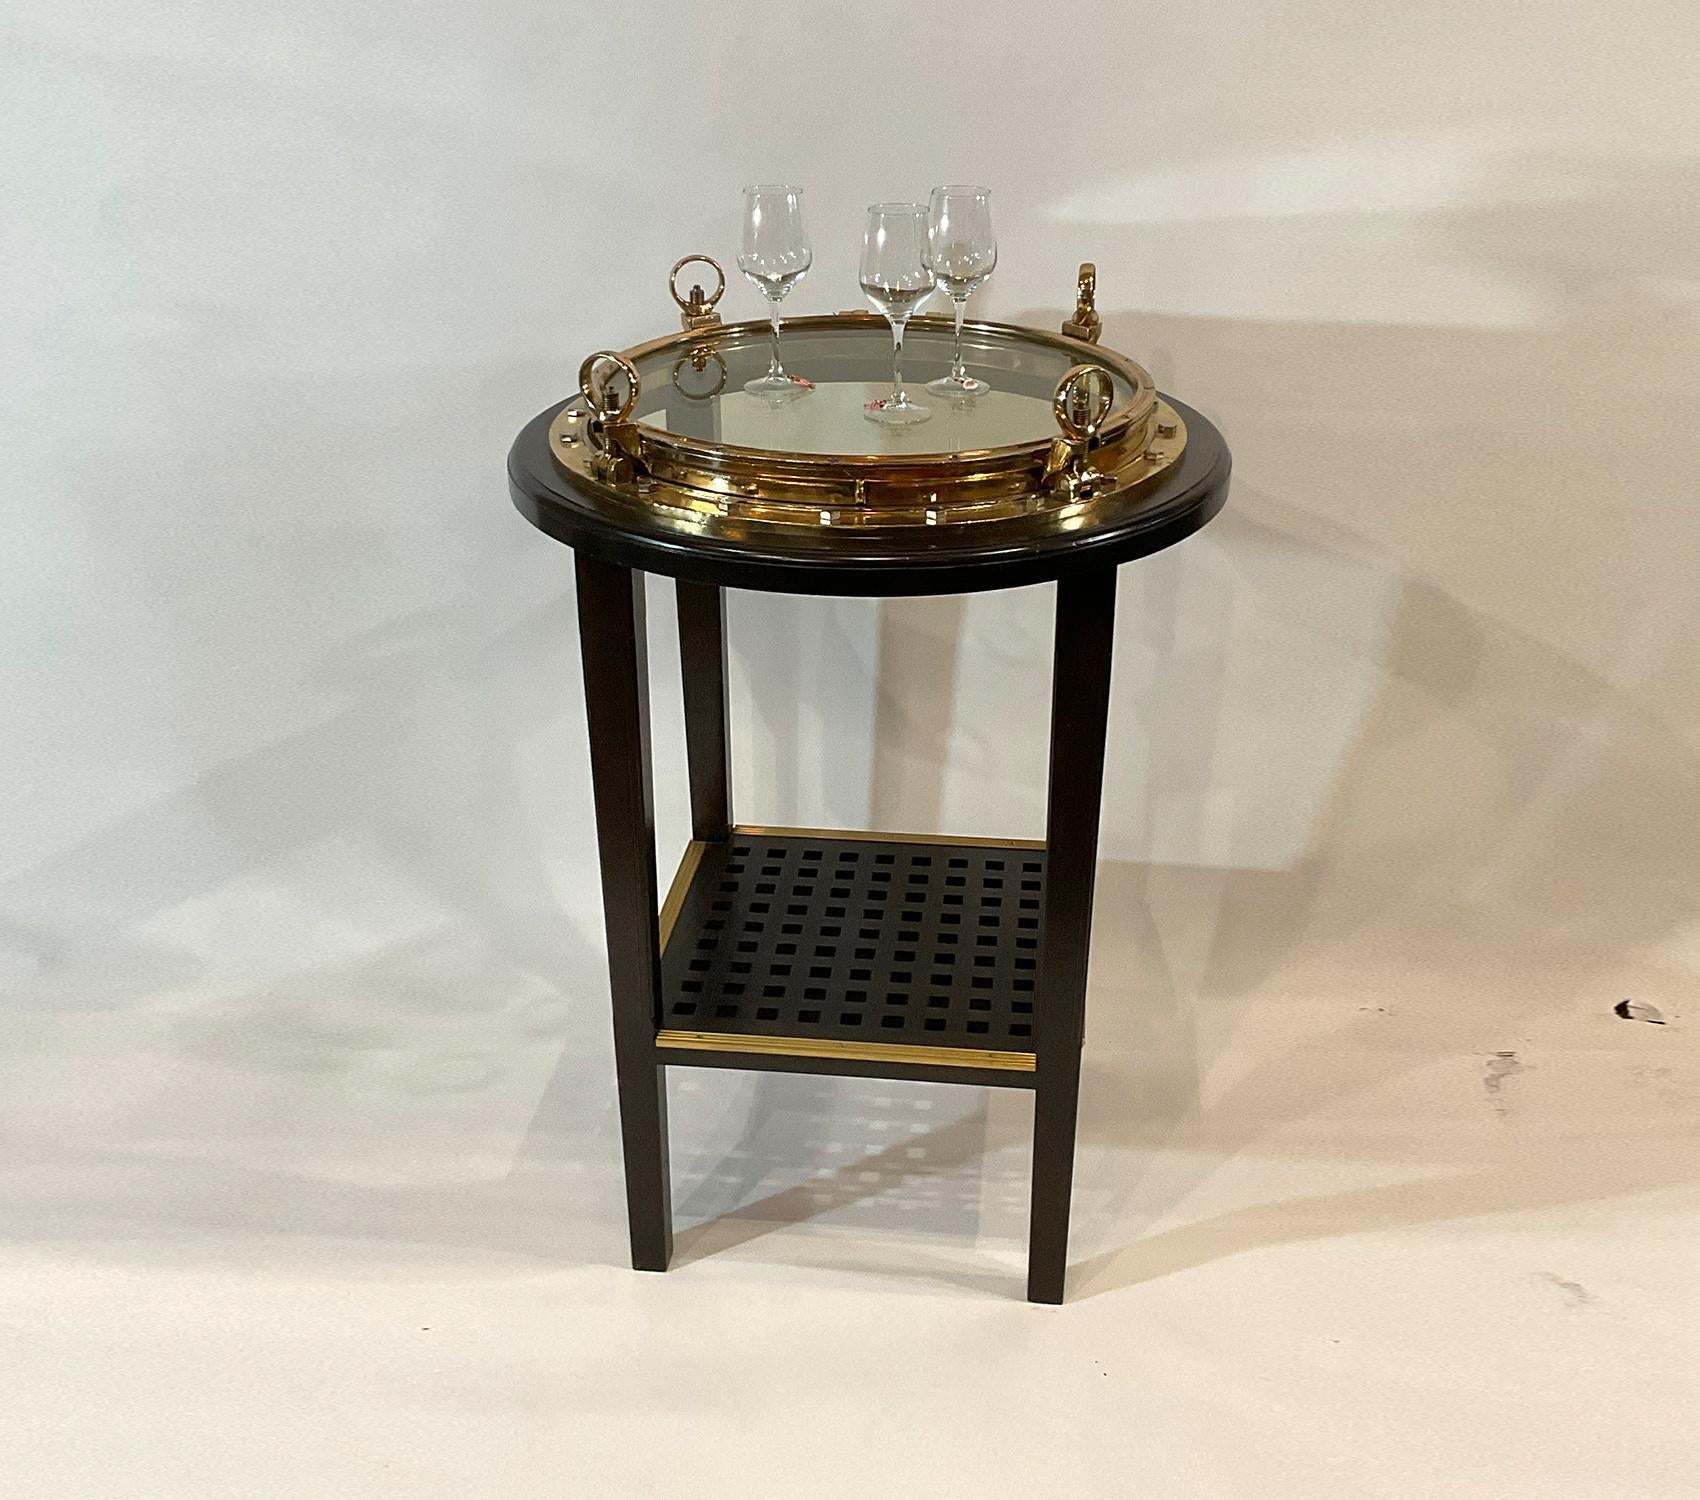 Fabulous bar height porthole table built with an absolutely massive ships porthole. Meticulously polished and lacquered. The porthole top is three feet in diameter. It is mounted into a mahogany table with a ships grating shelf below with brass foot